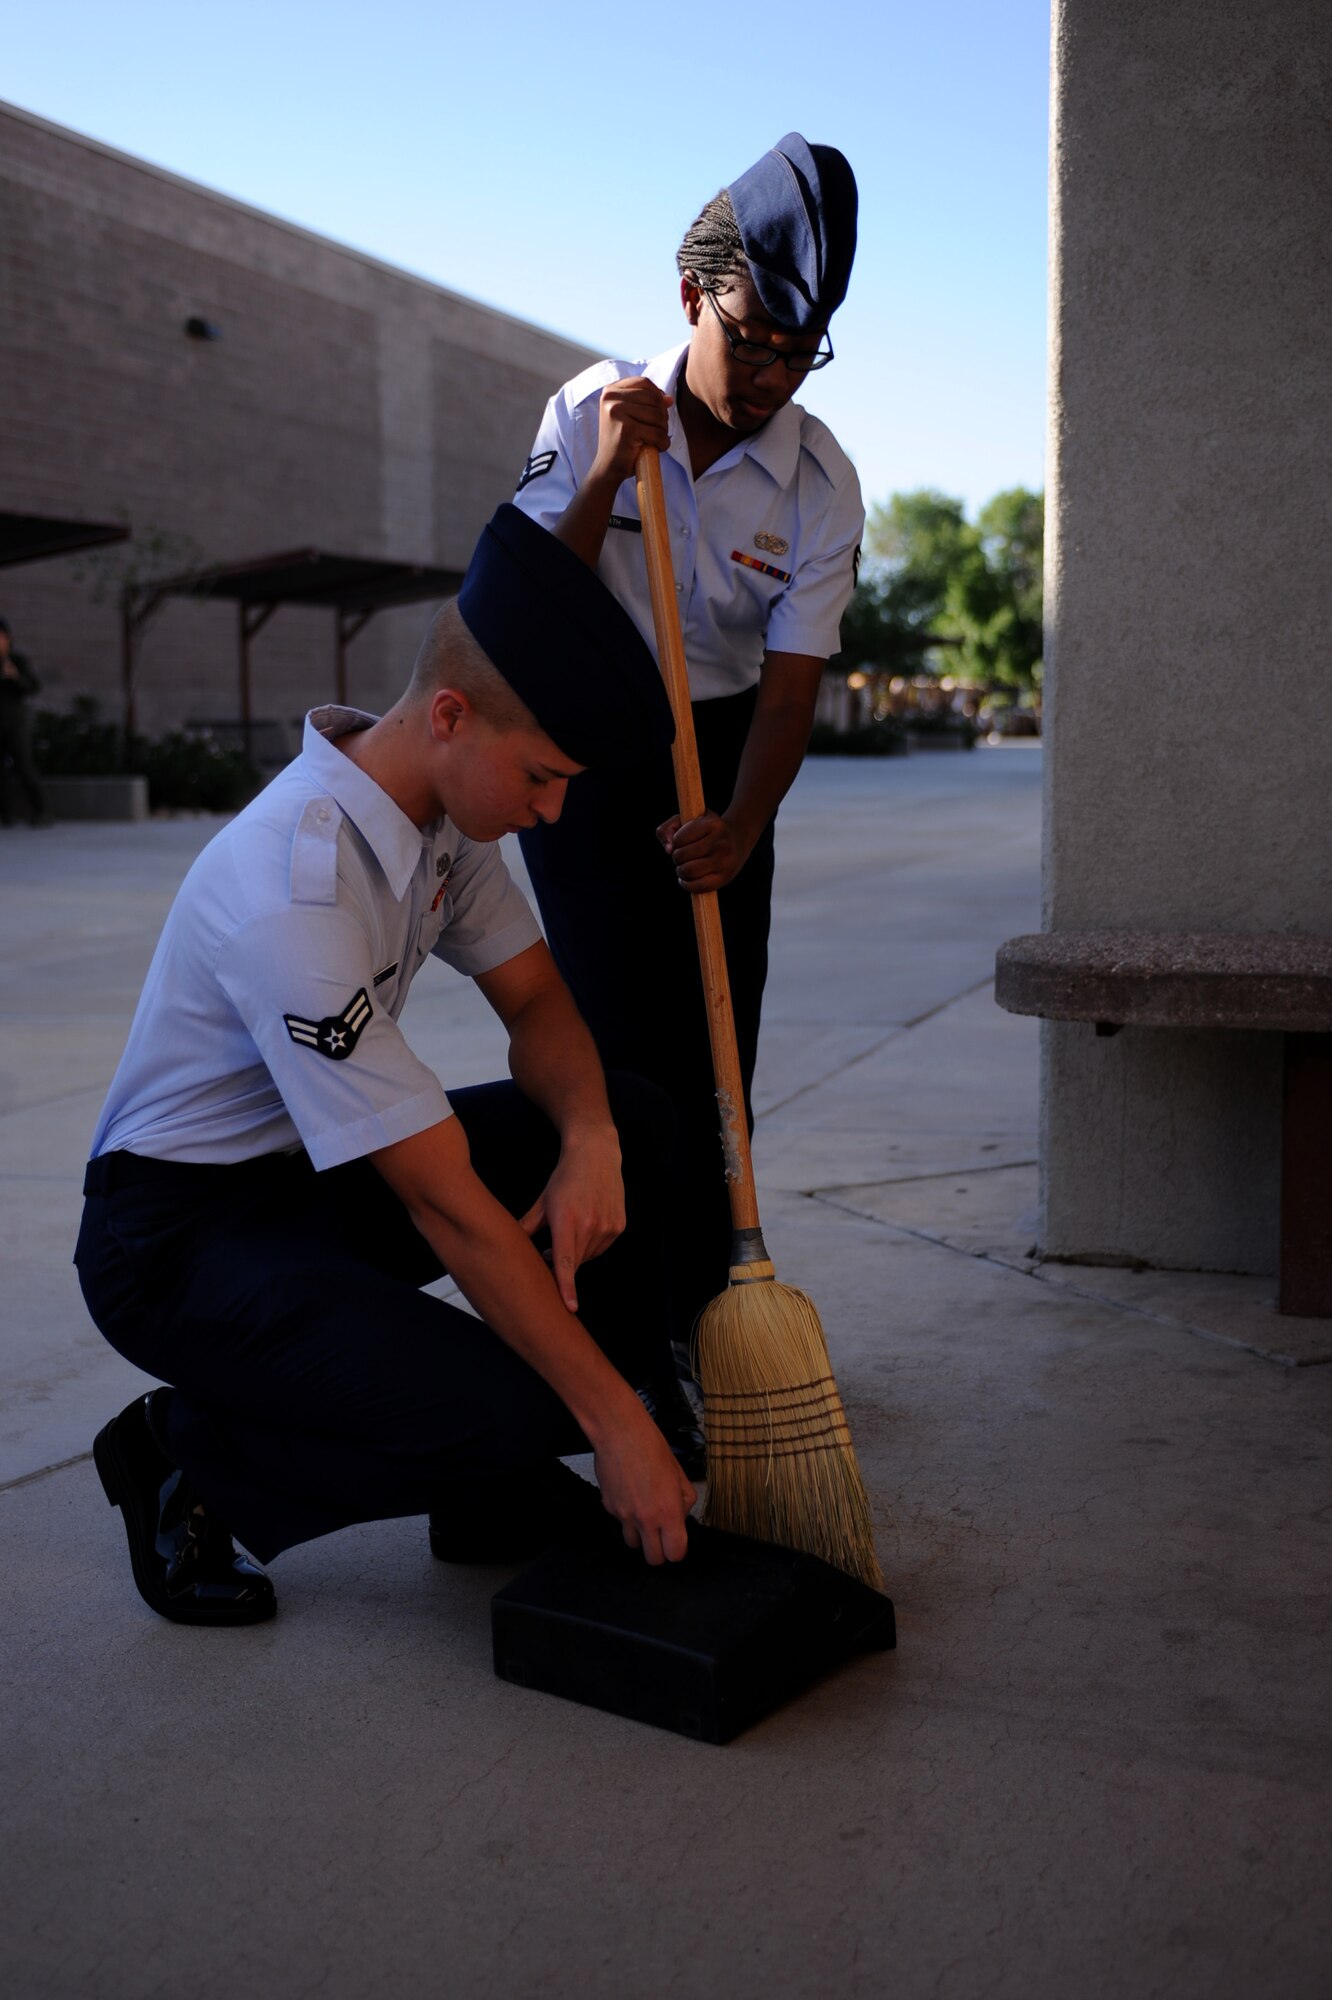 DAVIS-MONTHAN AIR FORCE BASE, Ariz. – Airman 1st Class Jaime Heathe, 355 Operational Weather Squadron, sweeps as Airman 1st Class Luke Ivazic, 355 Component Maintenance Squadron,  holds the dust pan here Aug 25. The center is designed to help first-term Airmen transition from technical school to a first duty station environment. (U.S. Air Force photo/Airman 1st  Class Christine Halan)